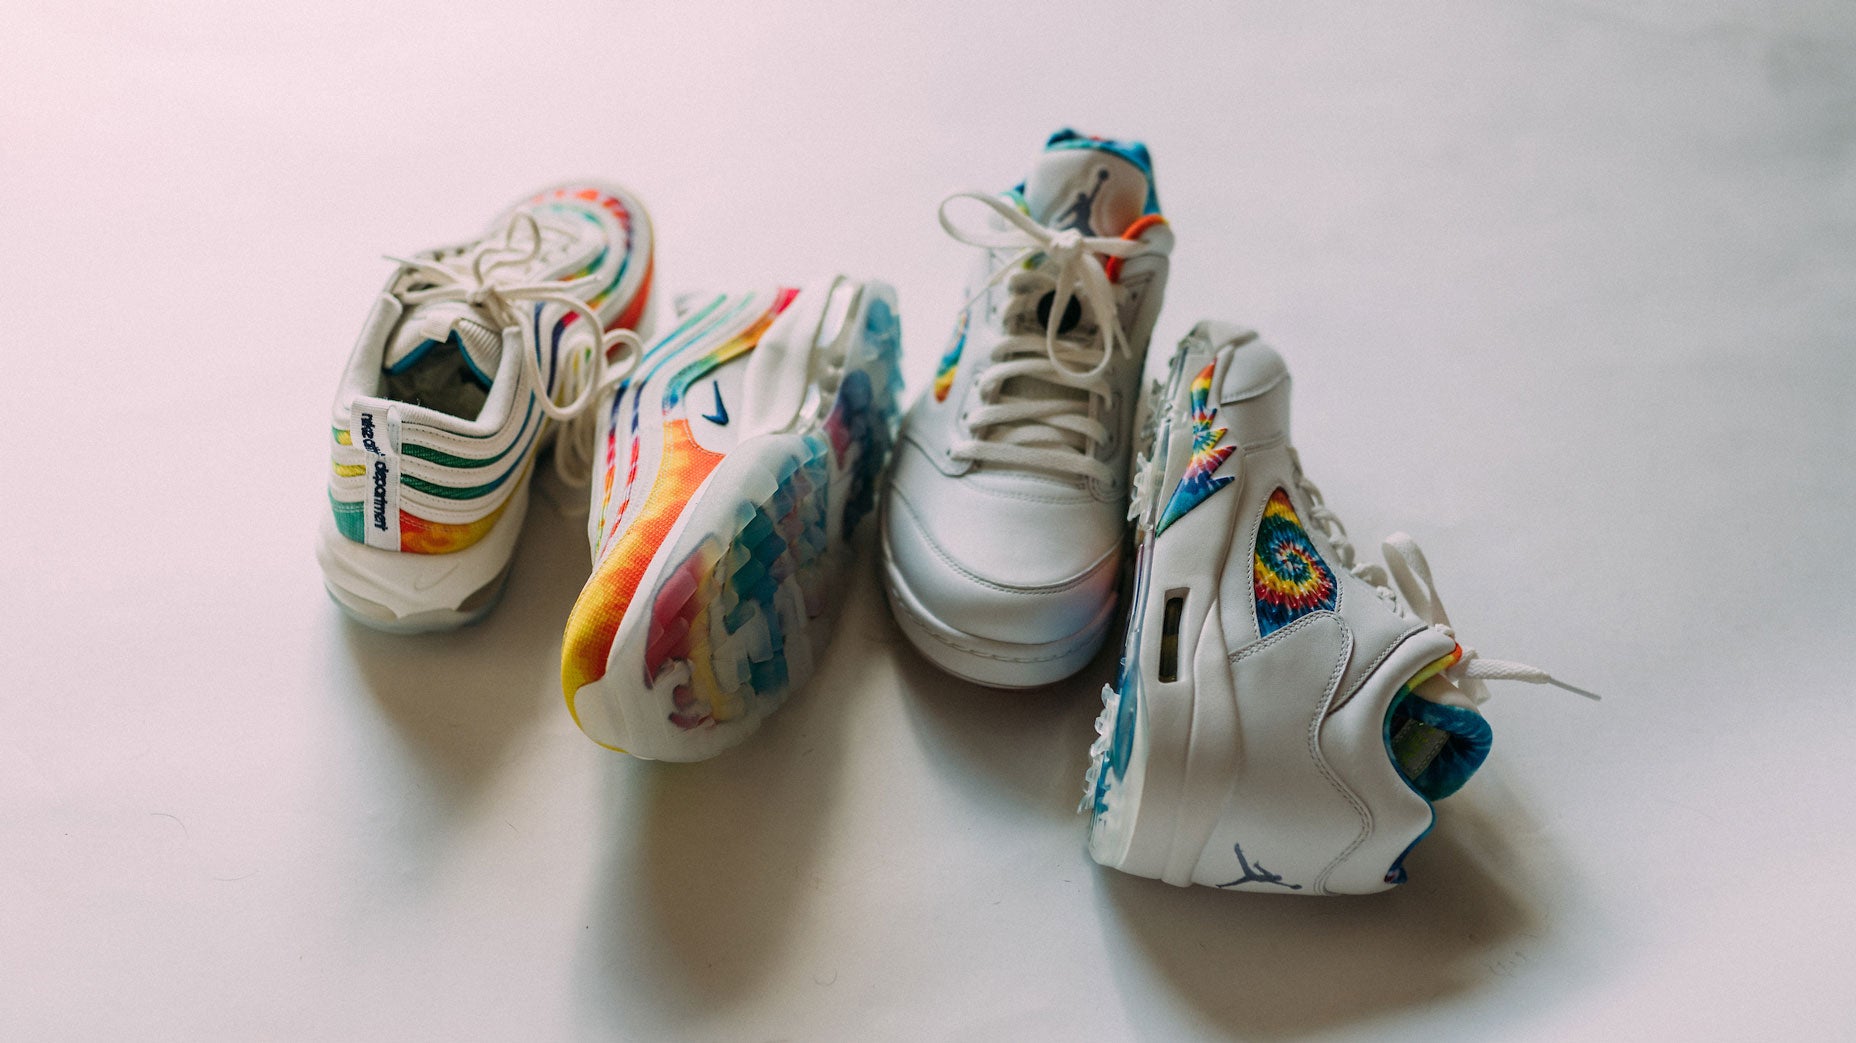 Nike's groovy new golf shoe collection celebrates peace and love